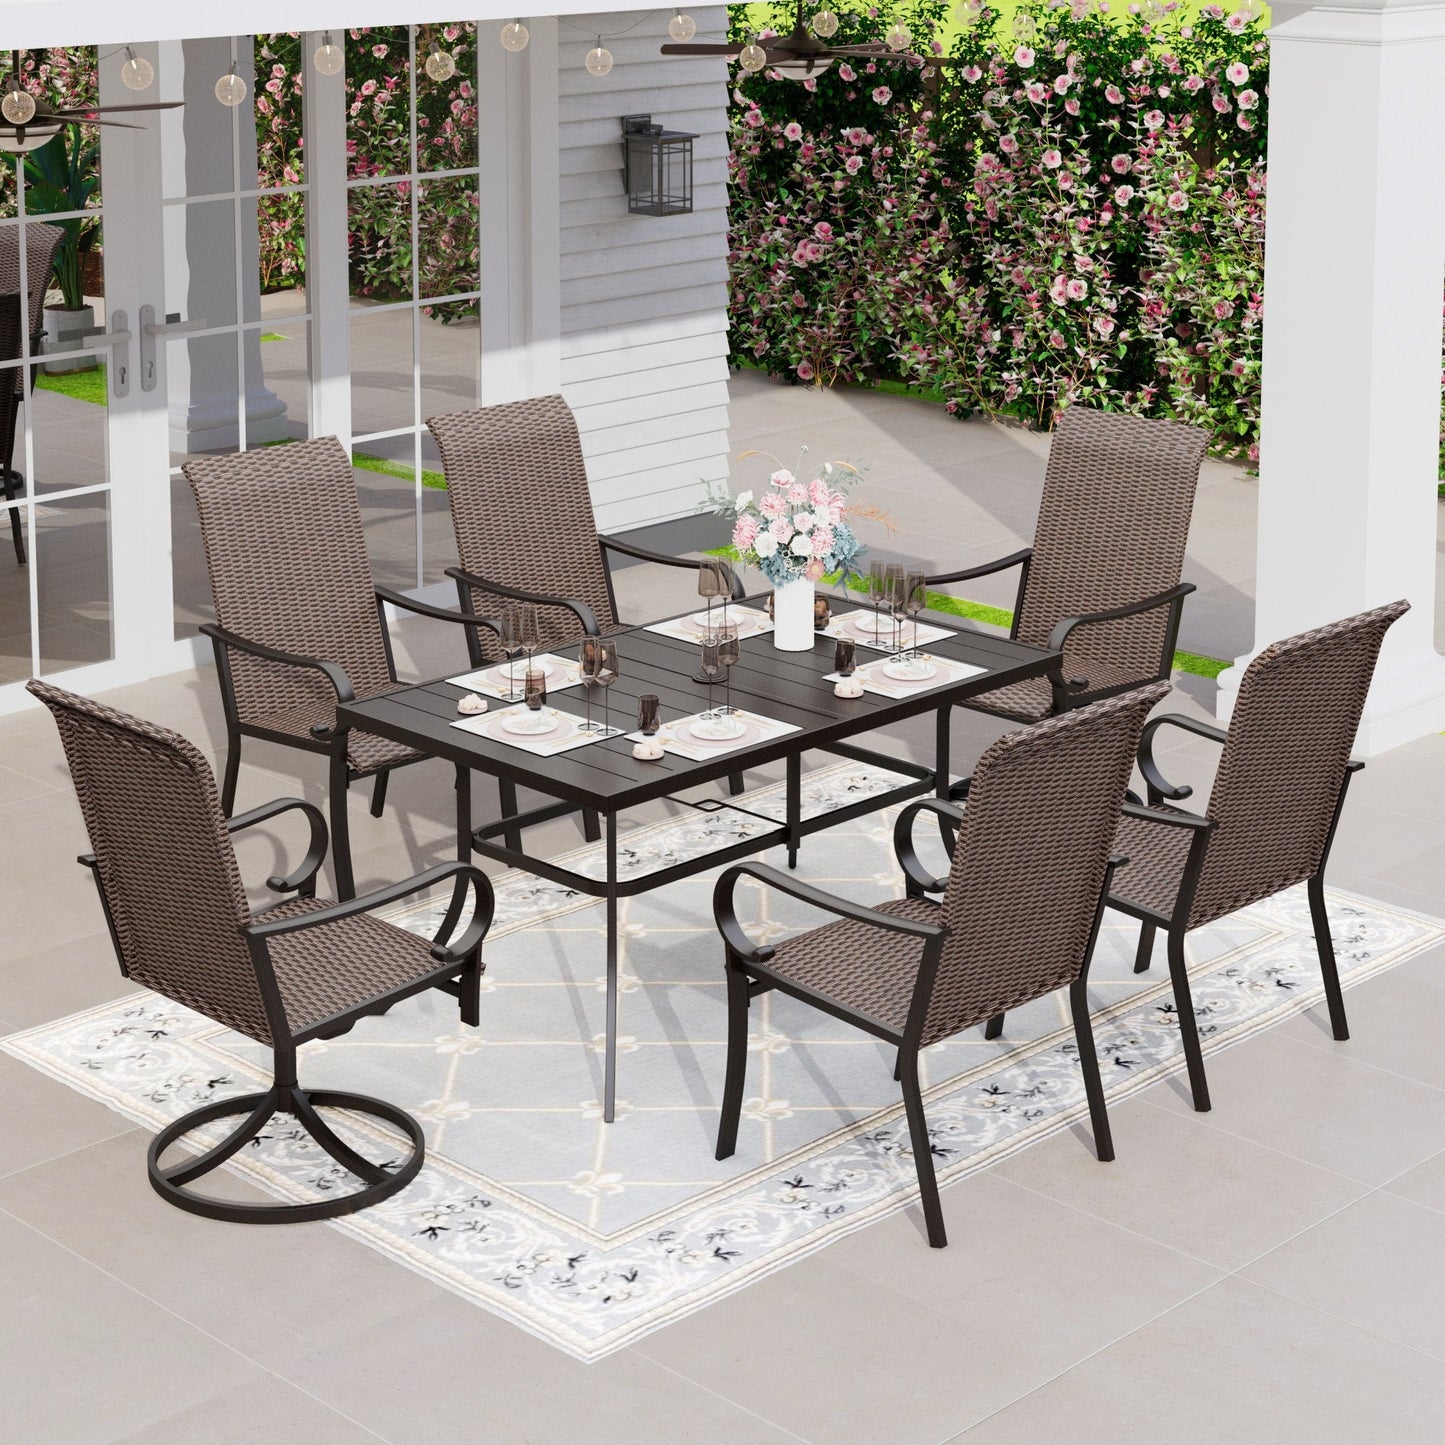 Sophia & William 7PCS Patio Dining Set Rattan Chairs and Table Set